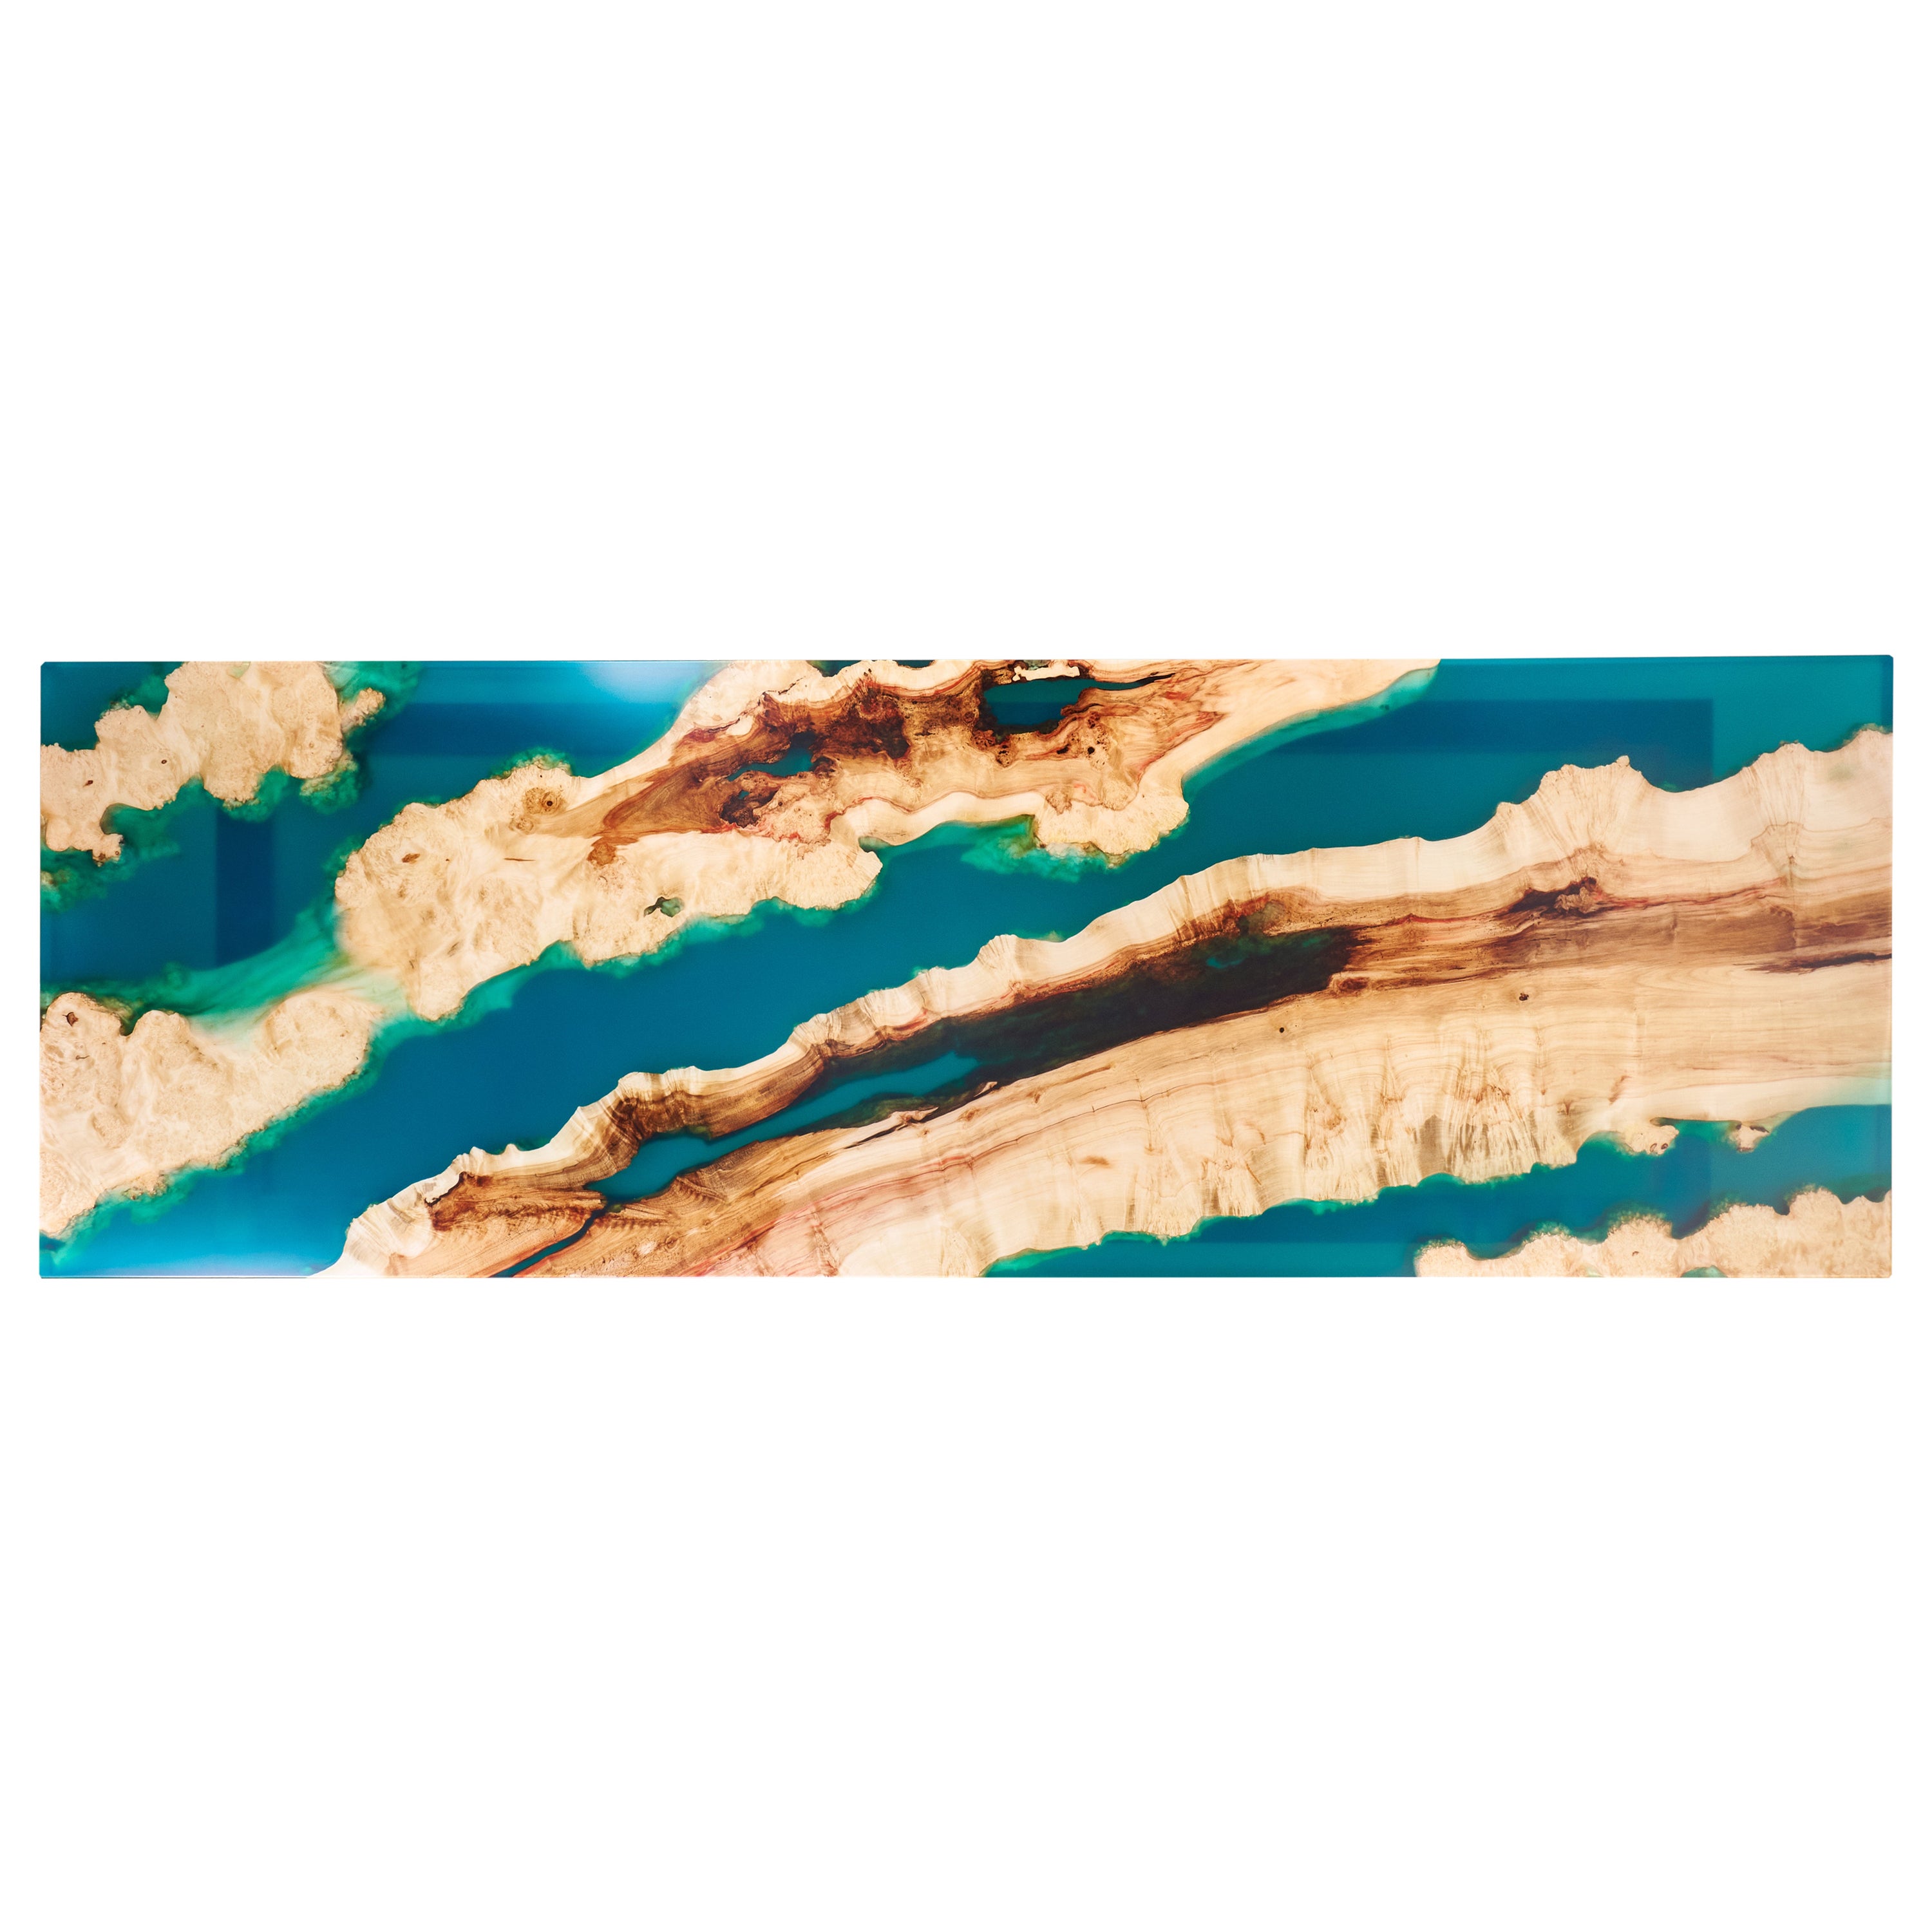 Emerald Vein 
Introducing the awe-inspiring Ancient Maple Burl Large Dining Table with Emerald Resin—a truly one-of-a-kind masterpiece crafted by the hands of great artists. This magnificent table brings together the timeless beauty of ancient maple